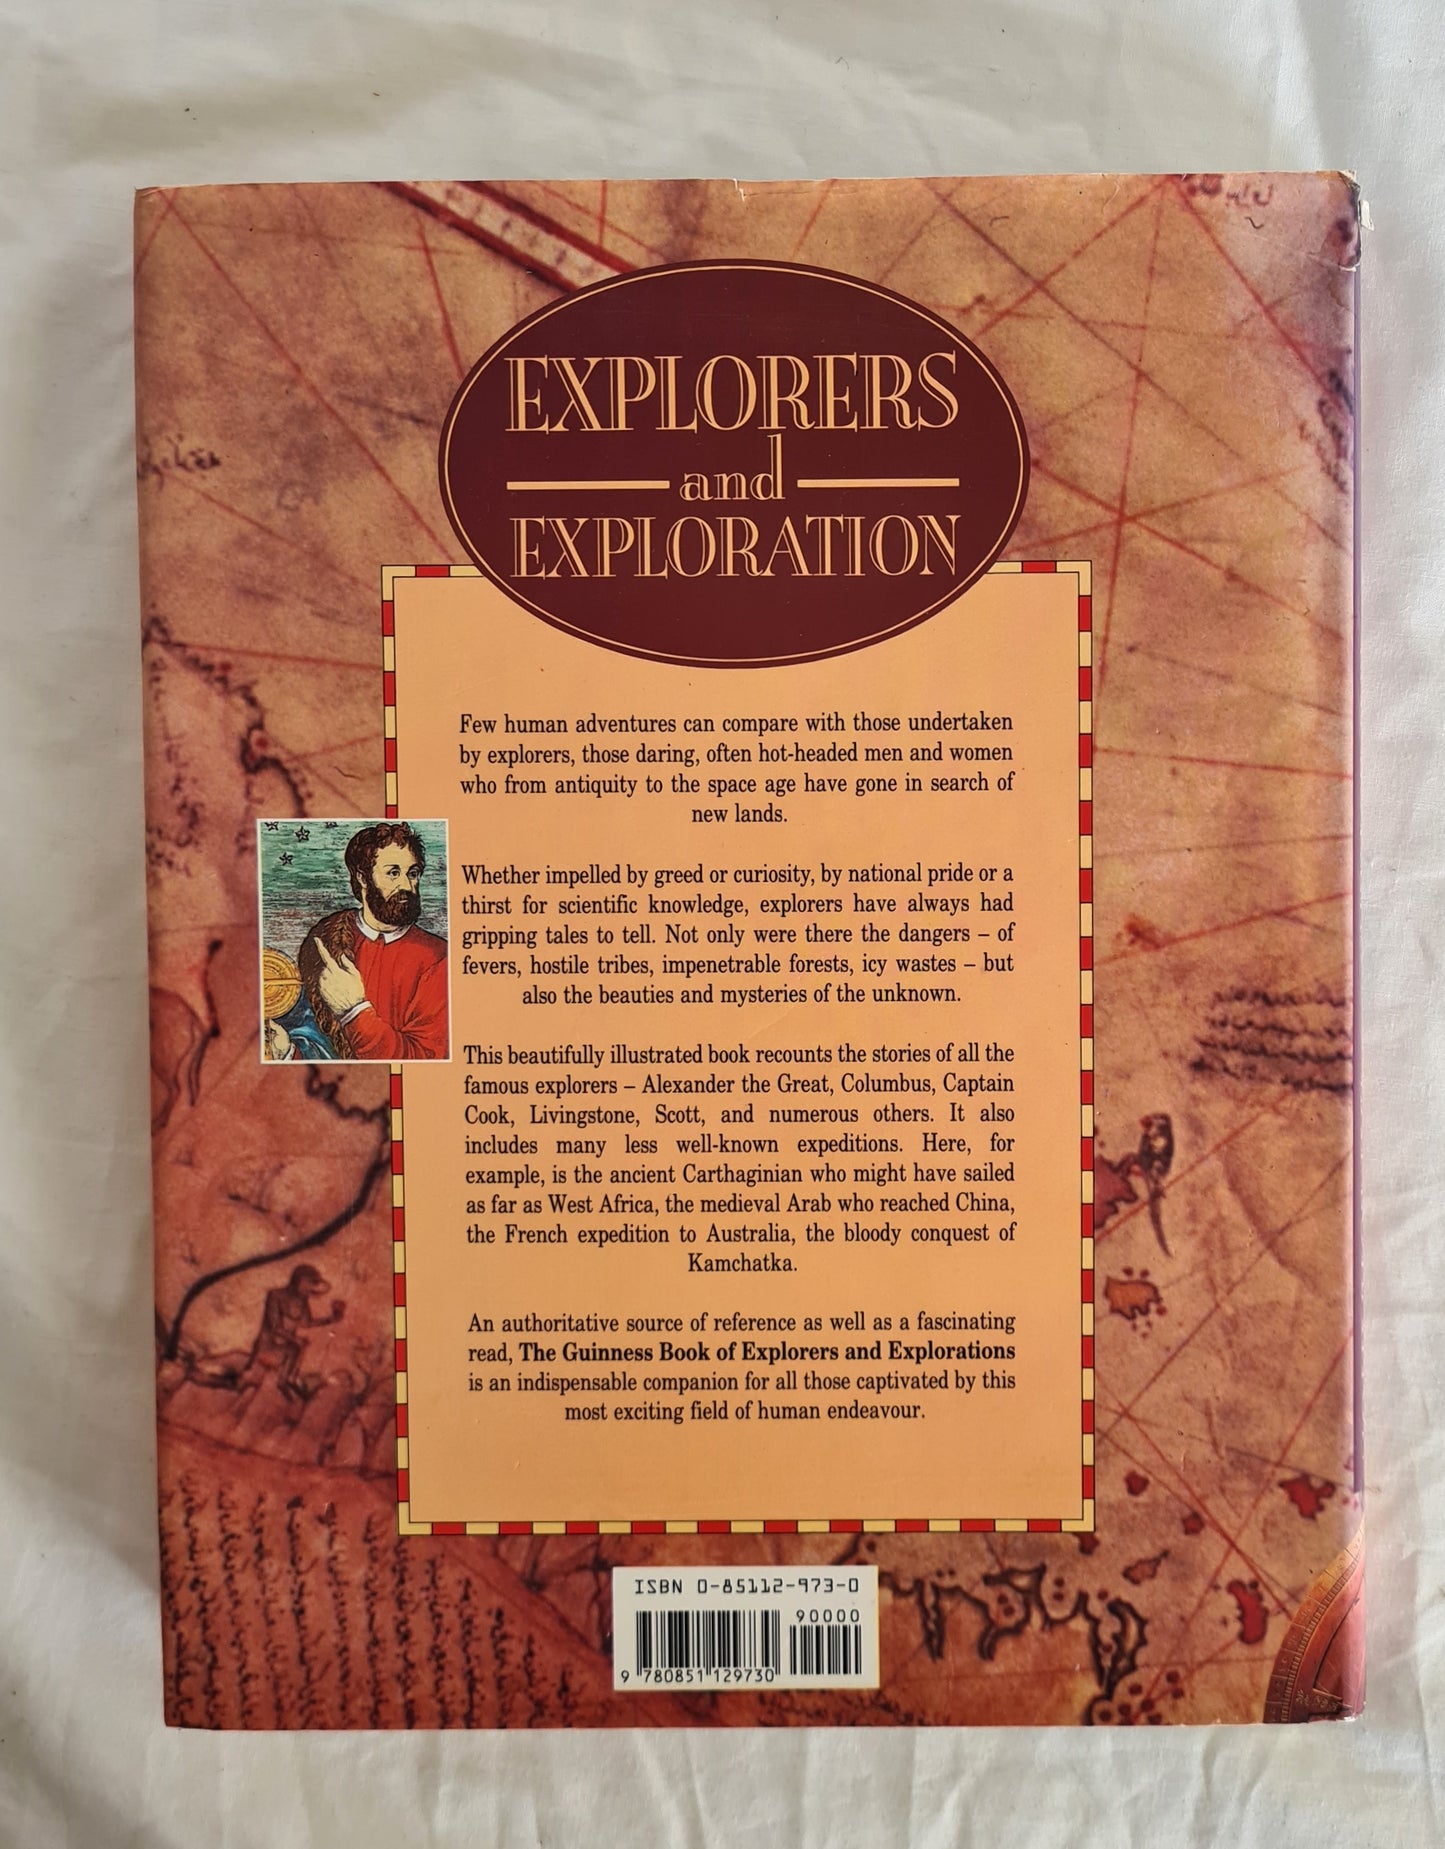 The Guinness Book of Explorers and Exploration by Michele Gavet-Imbert